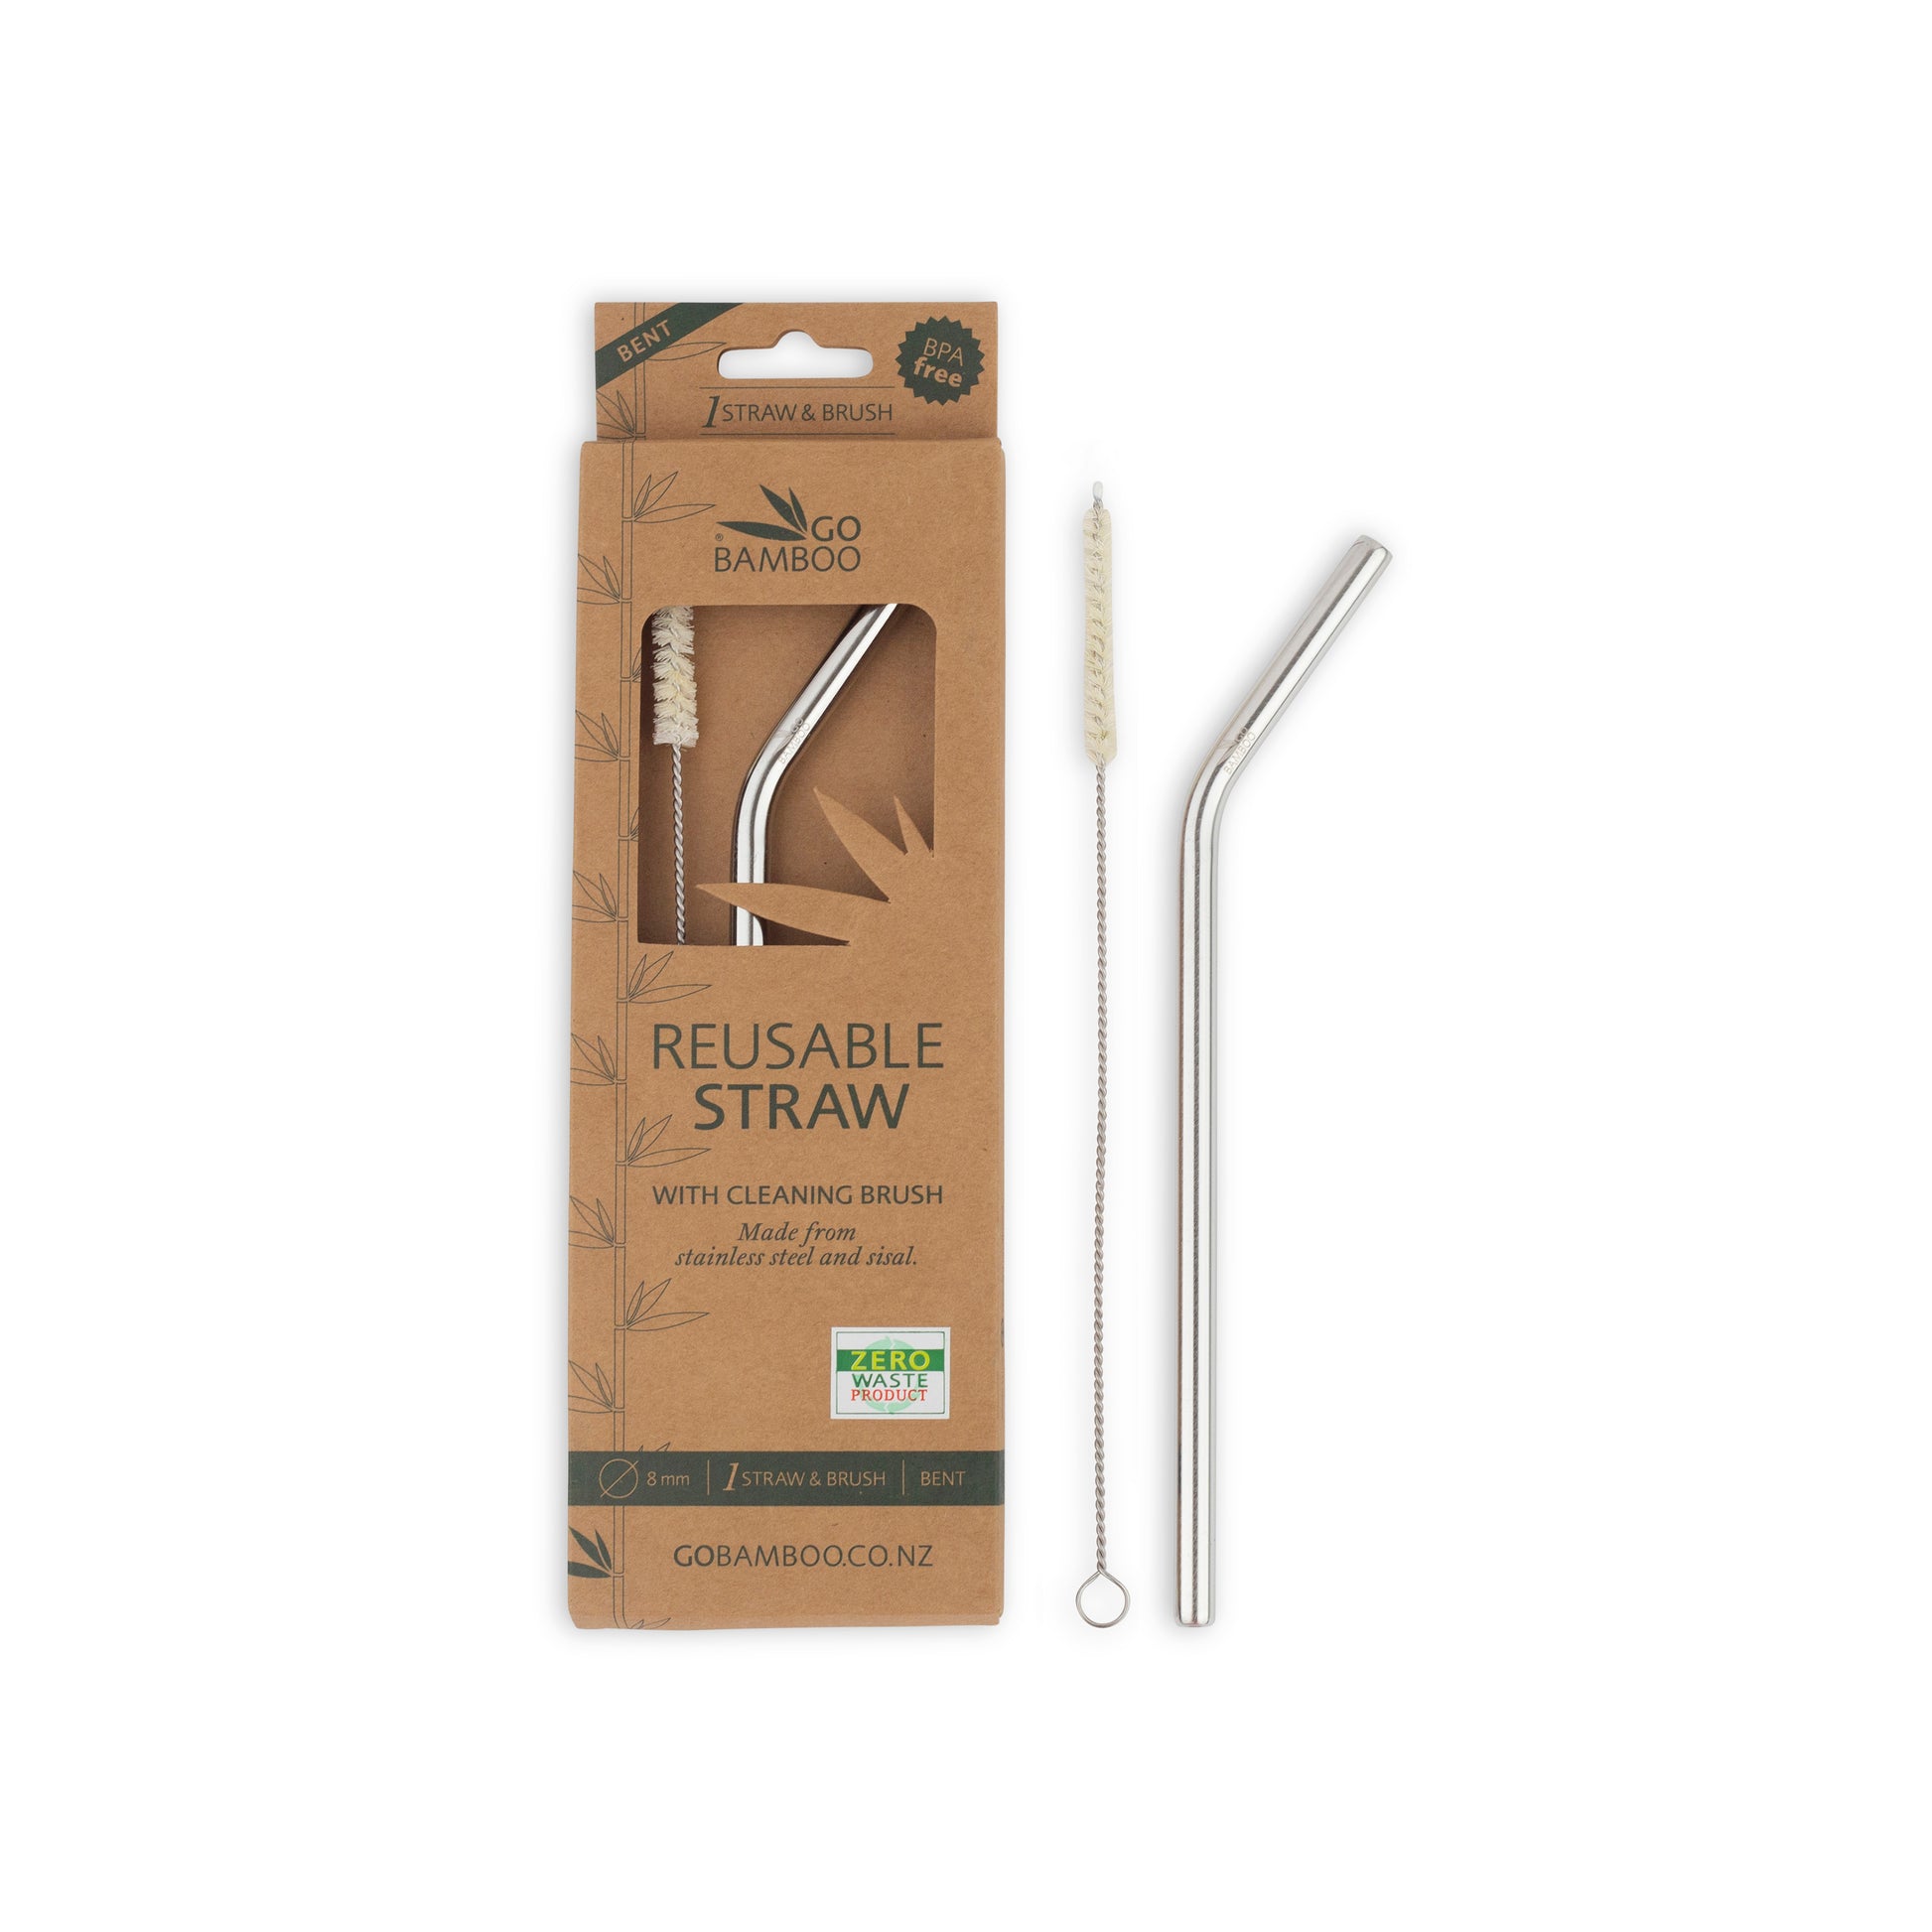 Stainless Steel Straws - Reusable Stainless Steel Straws - Go Bamboo